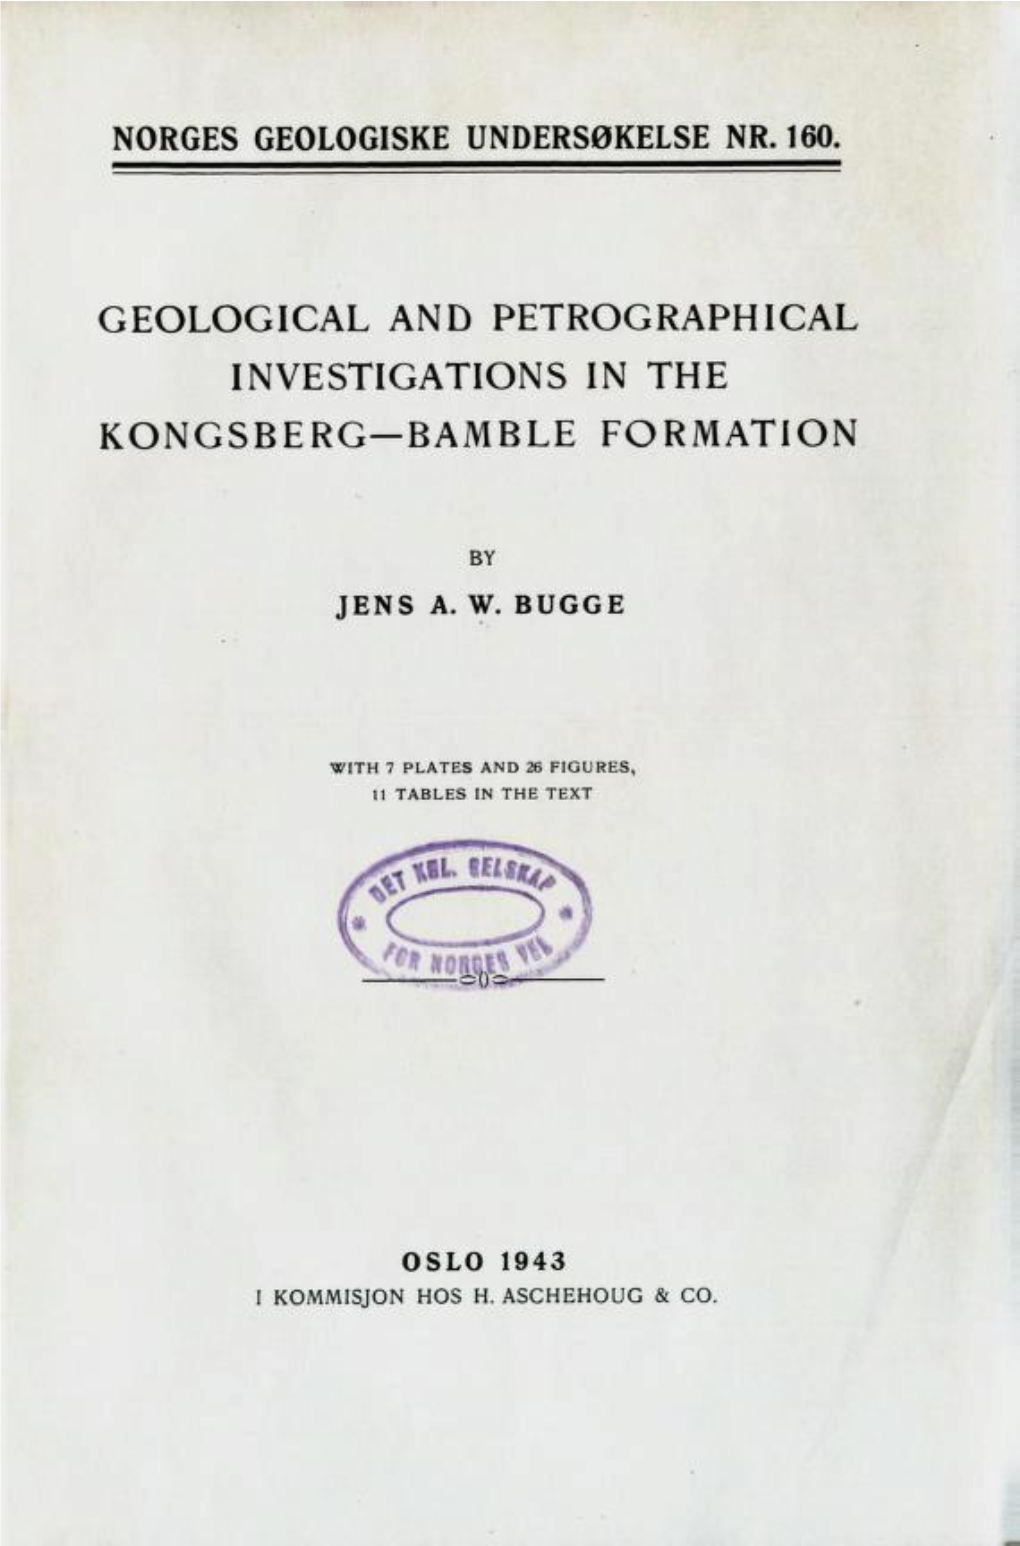 Geological and Petrographical Investigations in the Kongsberg— Bamble Formation